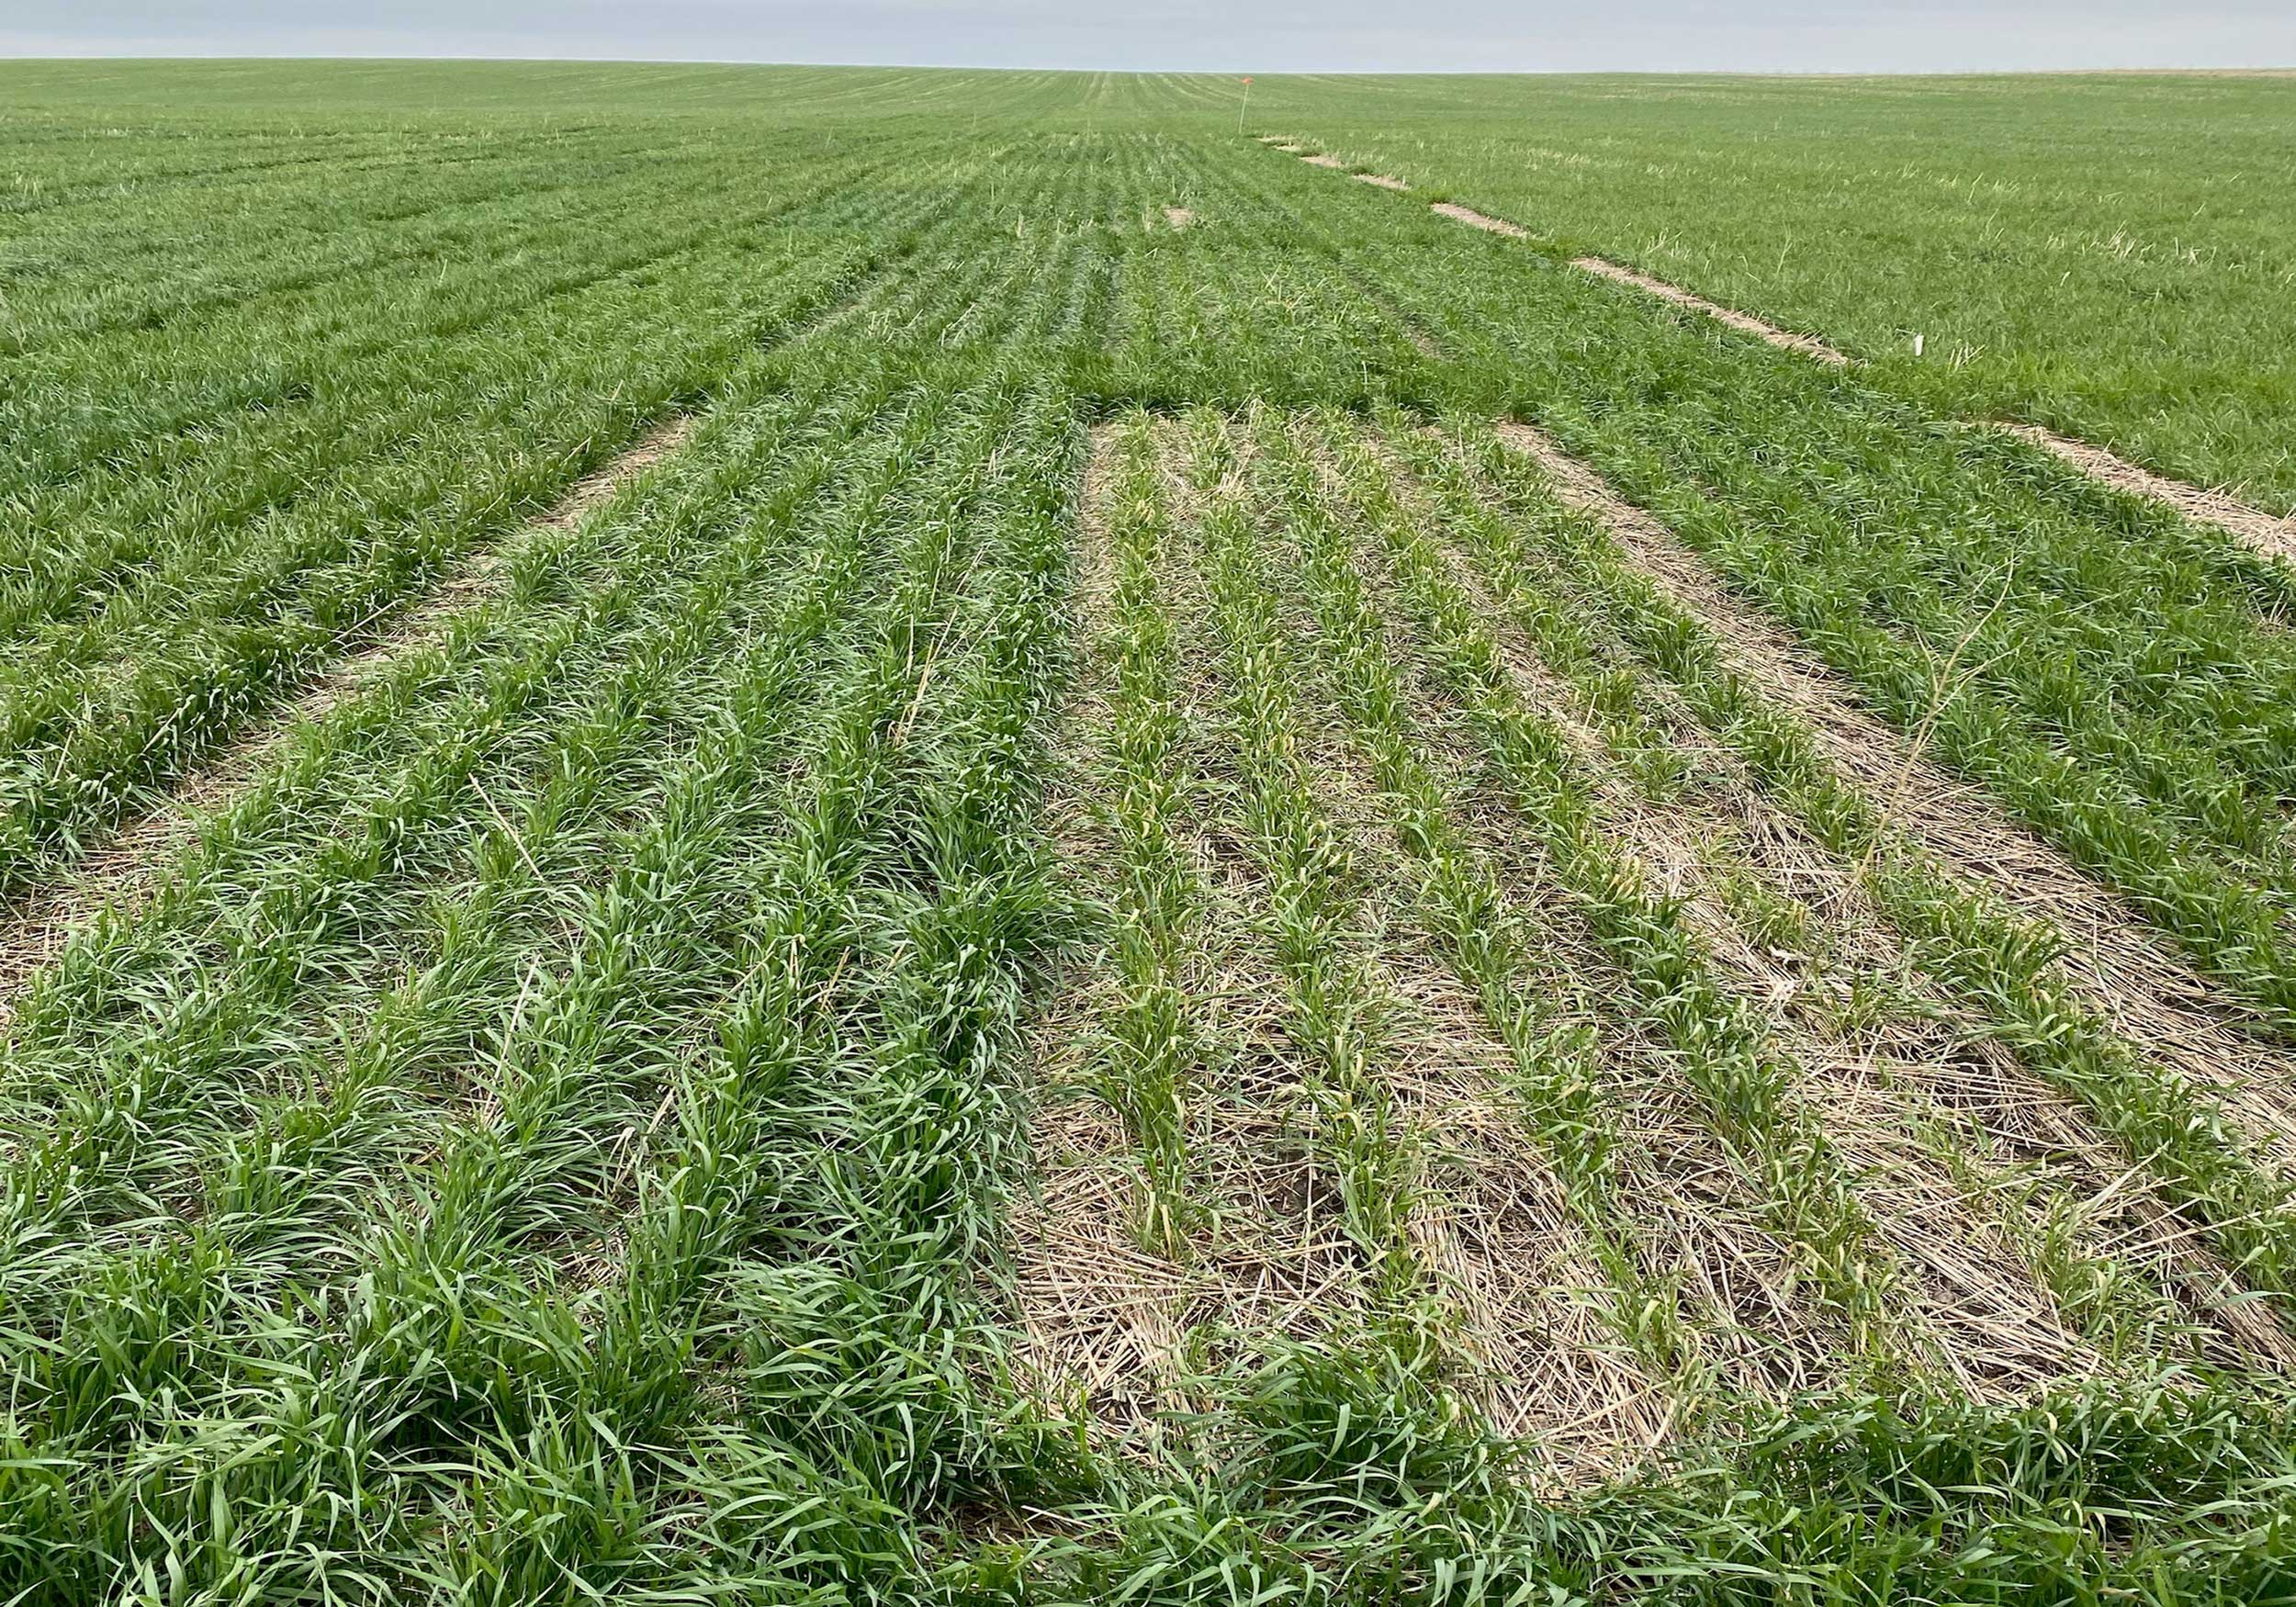 SDSU Extension Winter Wheat Variety trials. One plot is showing more yellowing and stress than other plots.